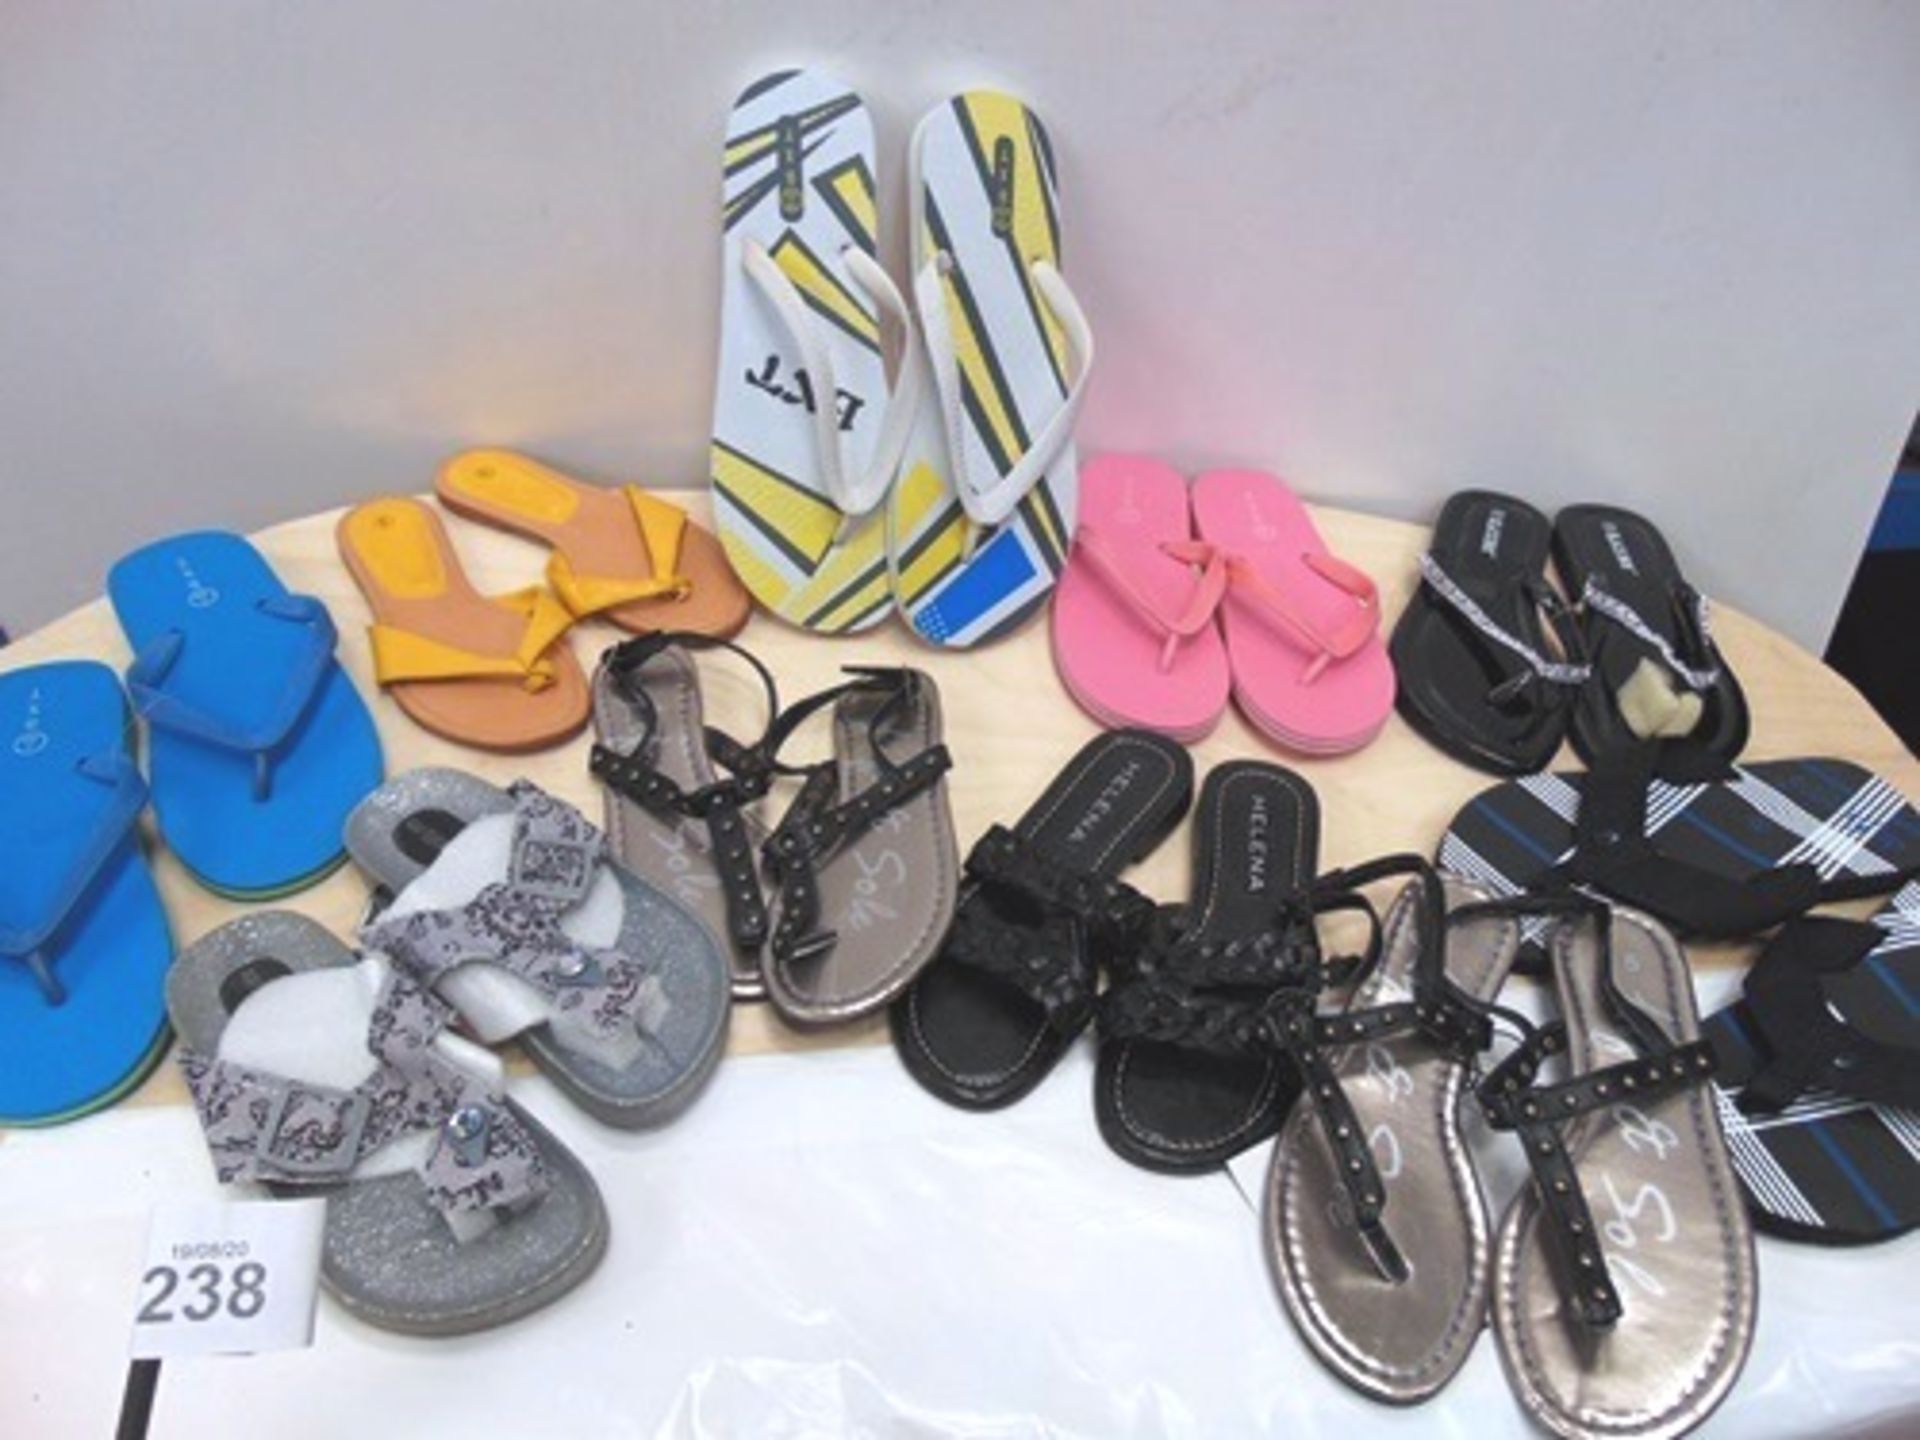 Approximately 30 x assorted pairs of men's, women's and children's footwear including flip-flops, - Image 2 of 4